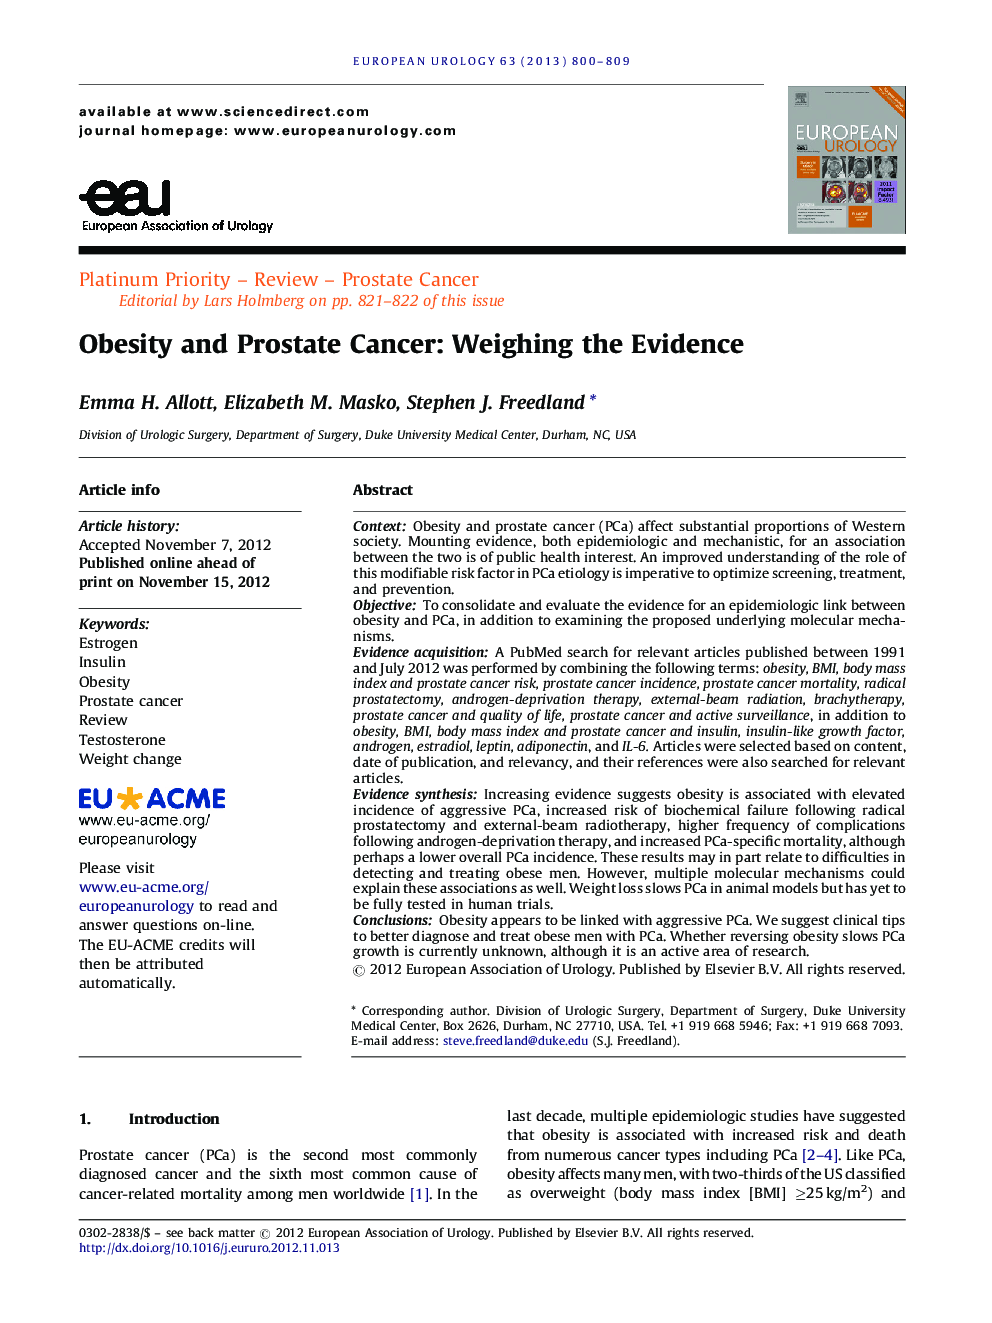 Obesity and Prostate Cancer: Weighing the Evidence 